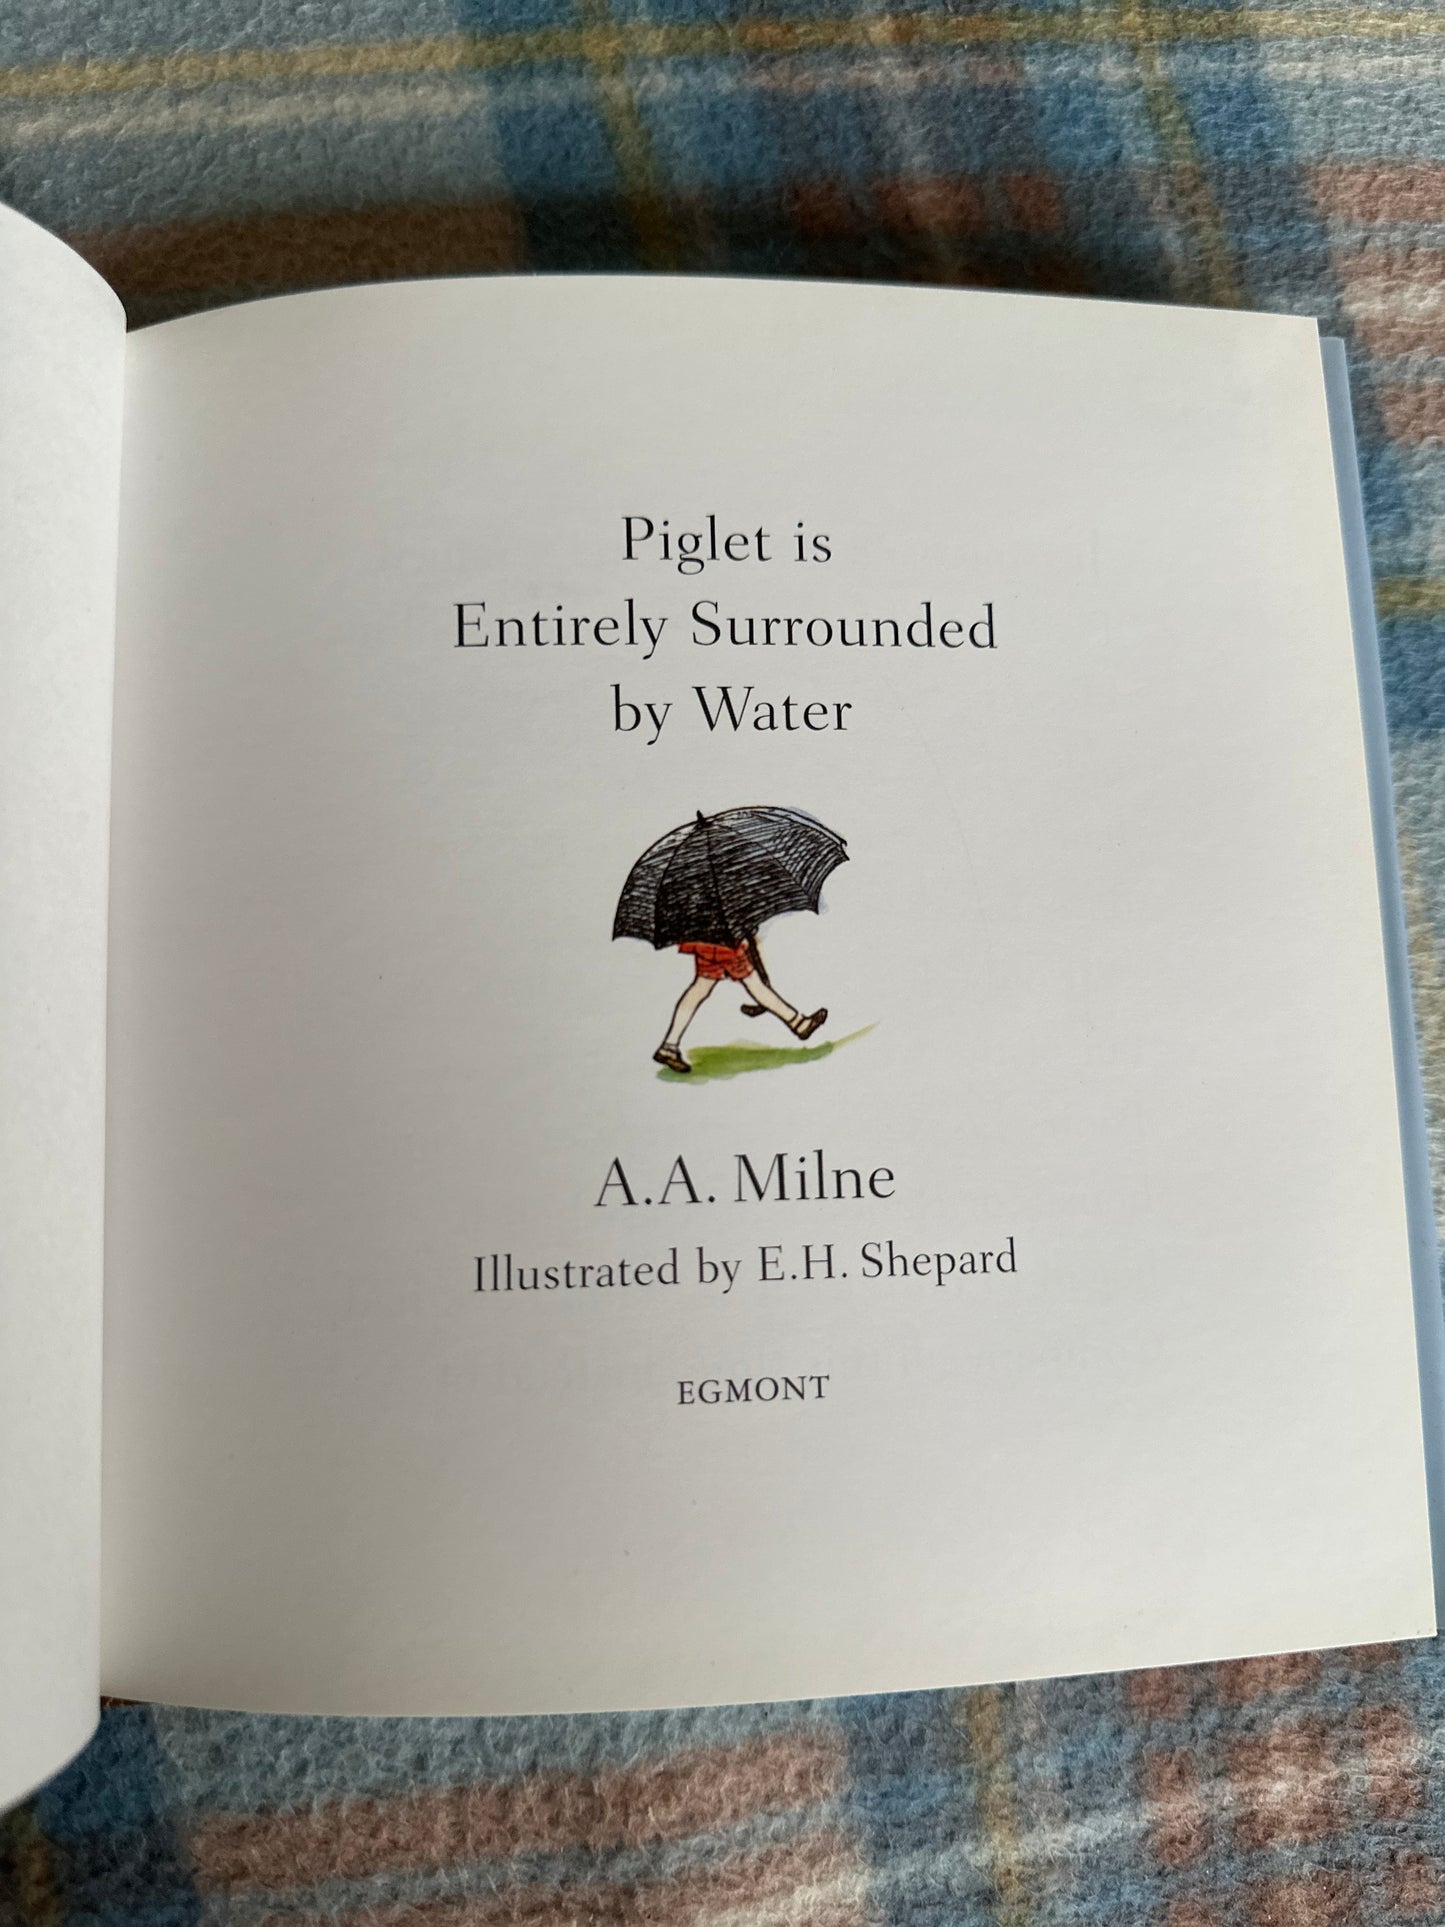 2003 Piglet Is Entirely Surrounded By Water - A.A. Milne(Ernest Shepard illustration) Egmont publisher